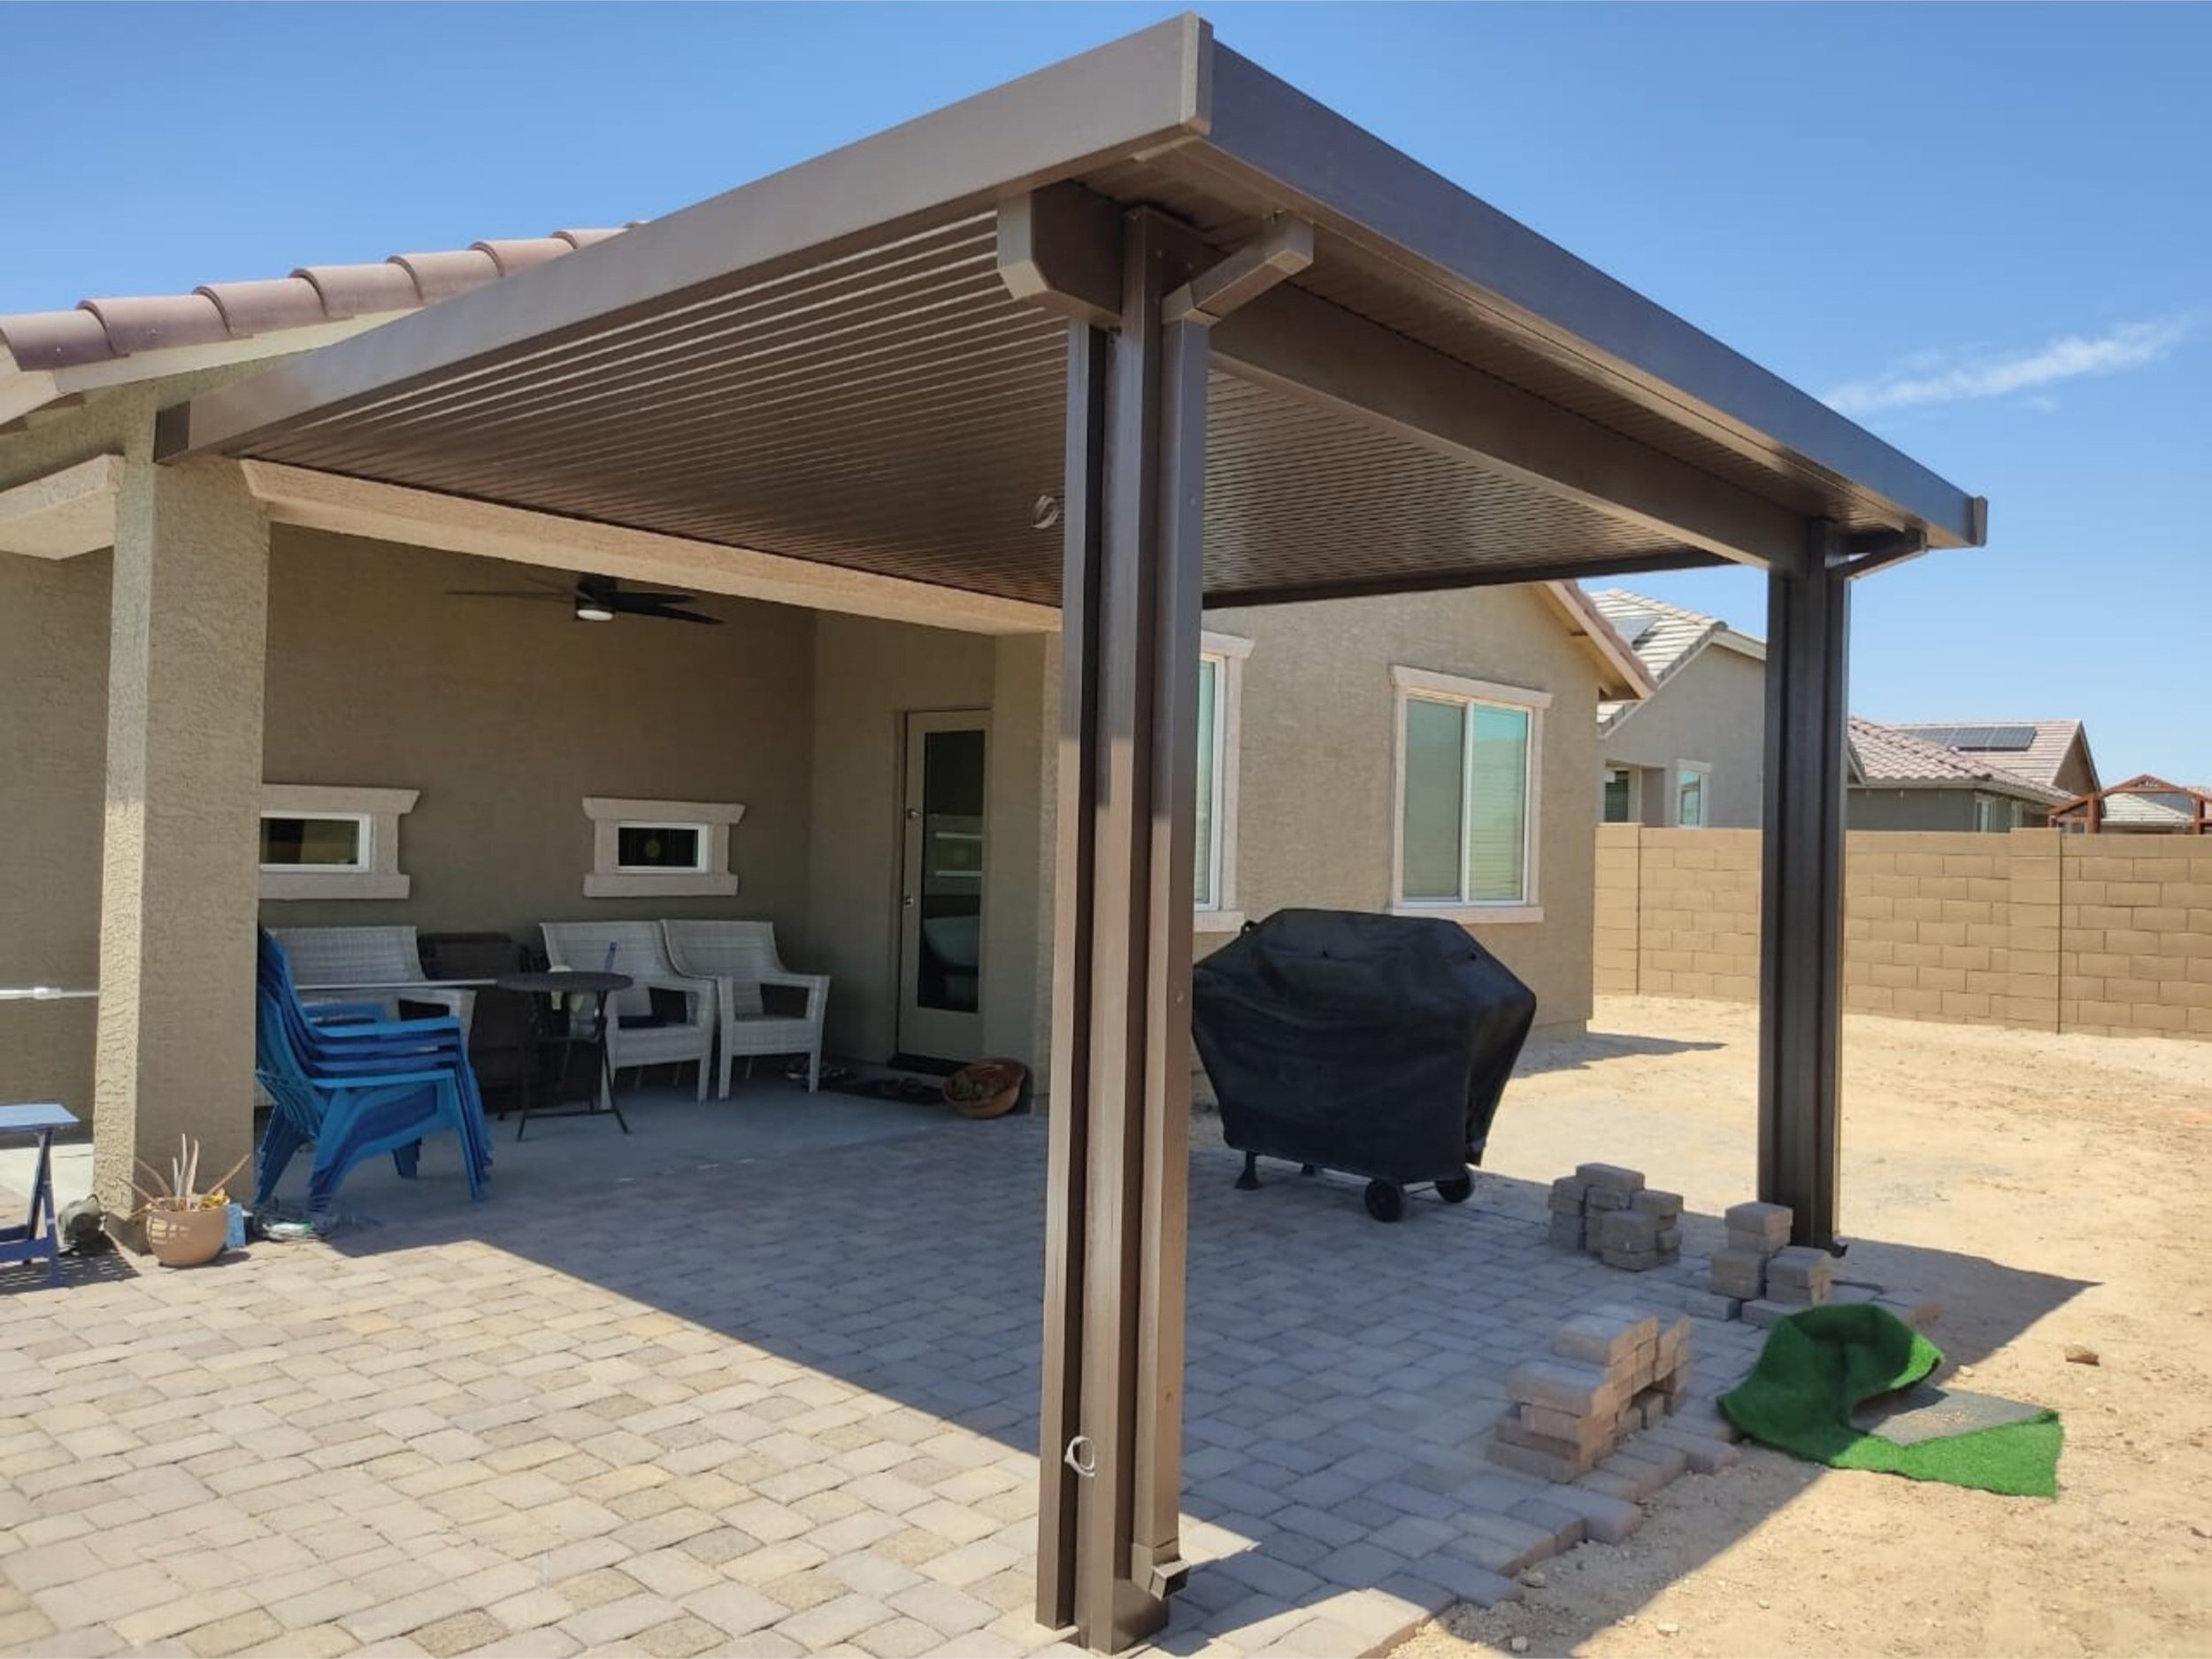 Phoenix Patio Cover Installation Services by Outshine Patio Cover; Lattice, 4K Aluminum Patio Covers and More in AZ.